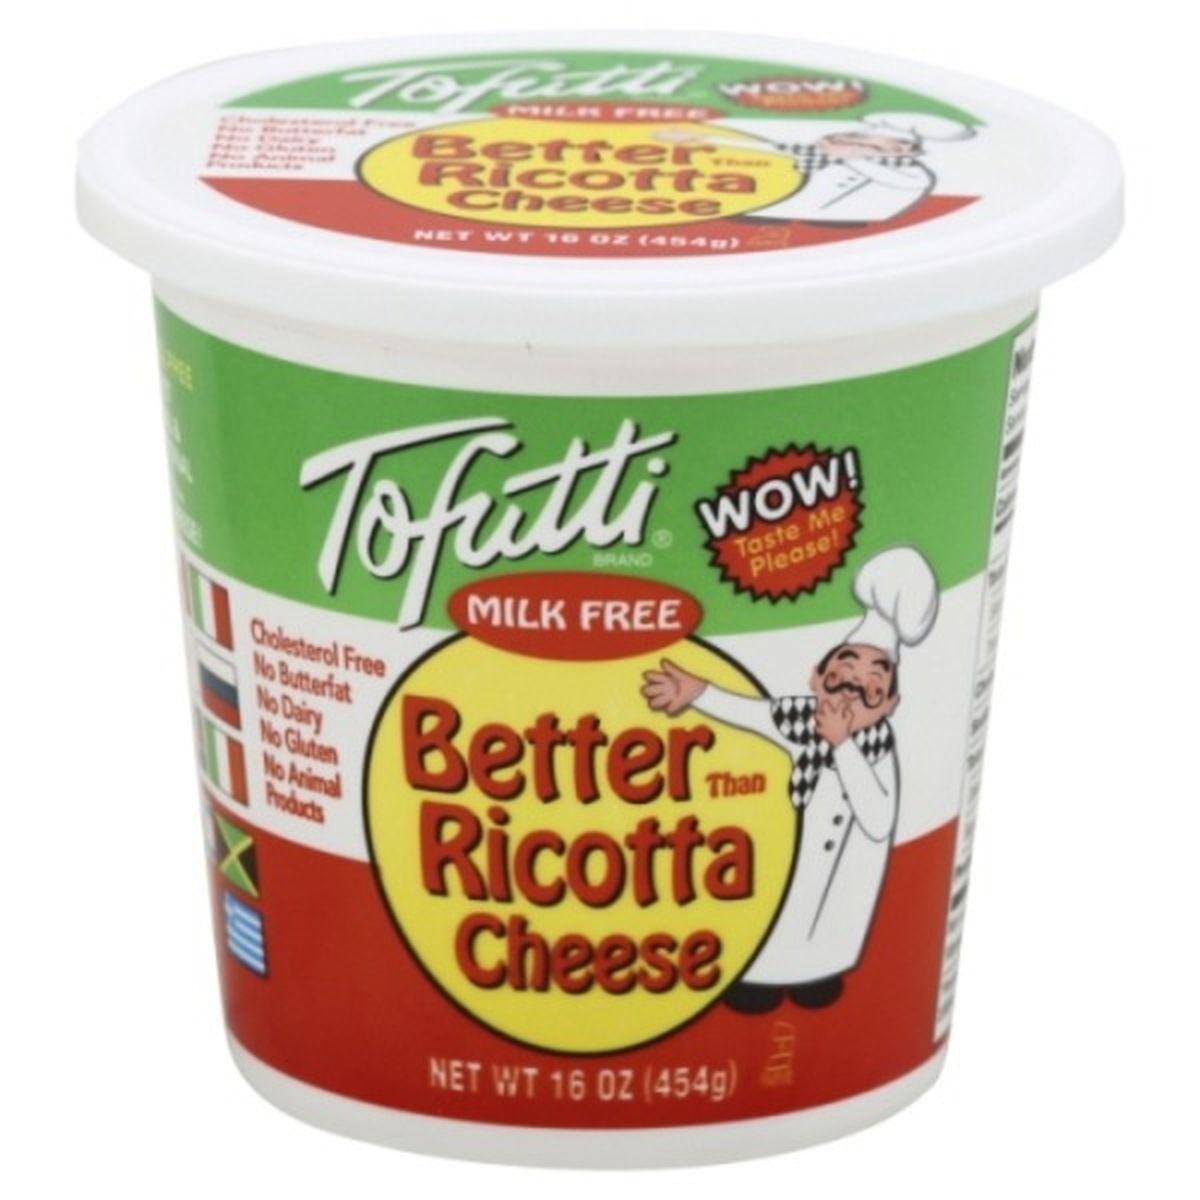 Calories in Tofutti Better Than Ricotta Cheese, Milk Free